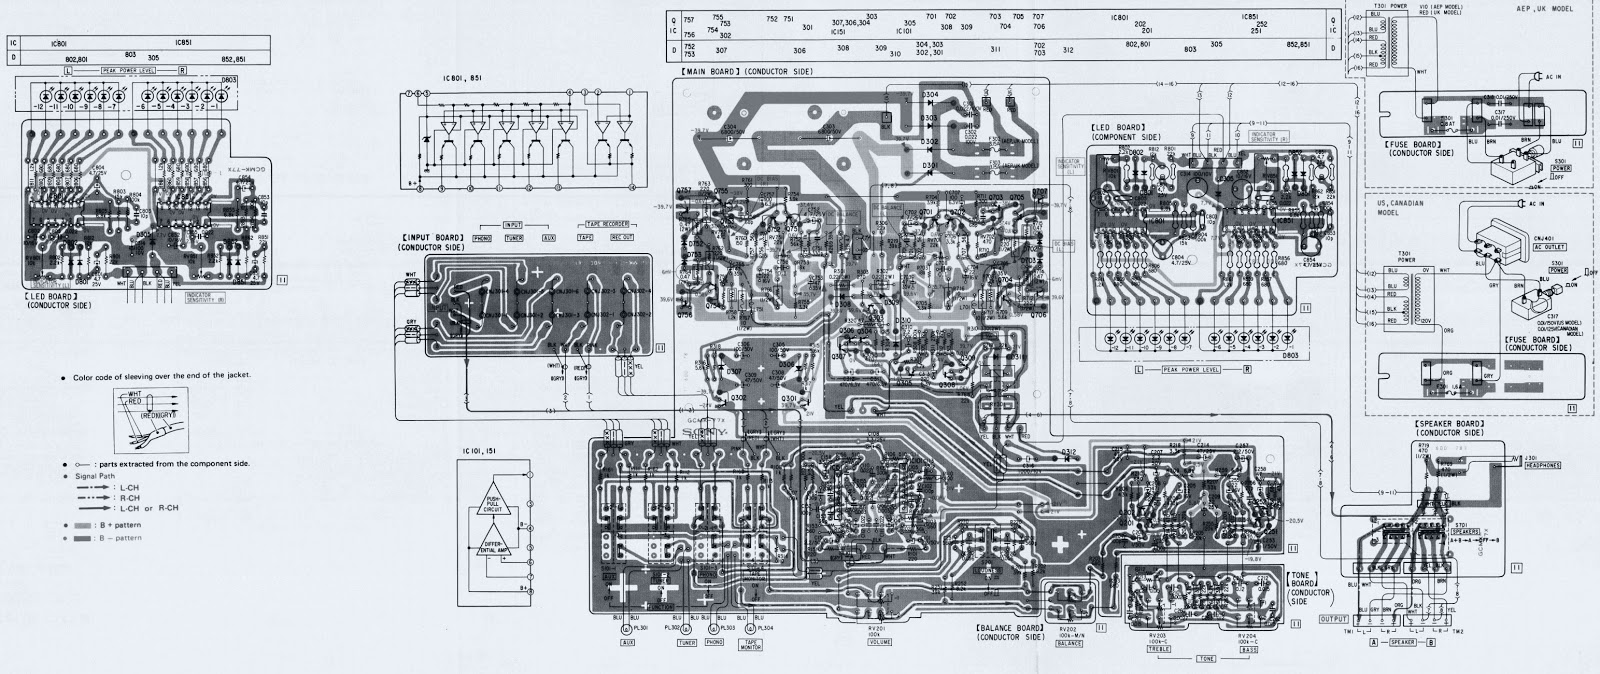 Electro help: Sony TA F30 – Integrated Stereo Amplifier – Circuit Diagram